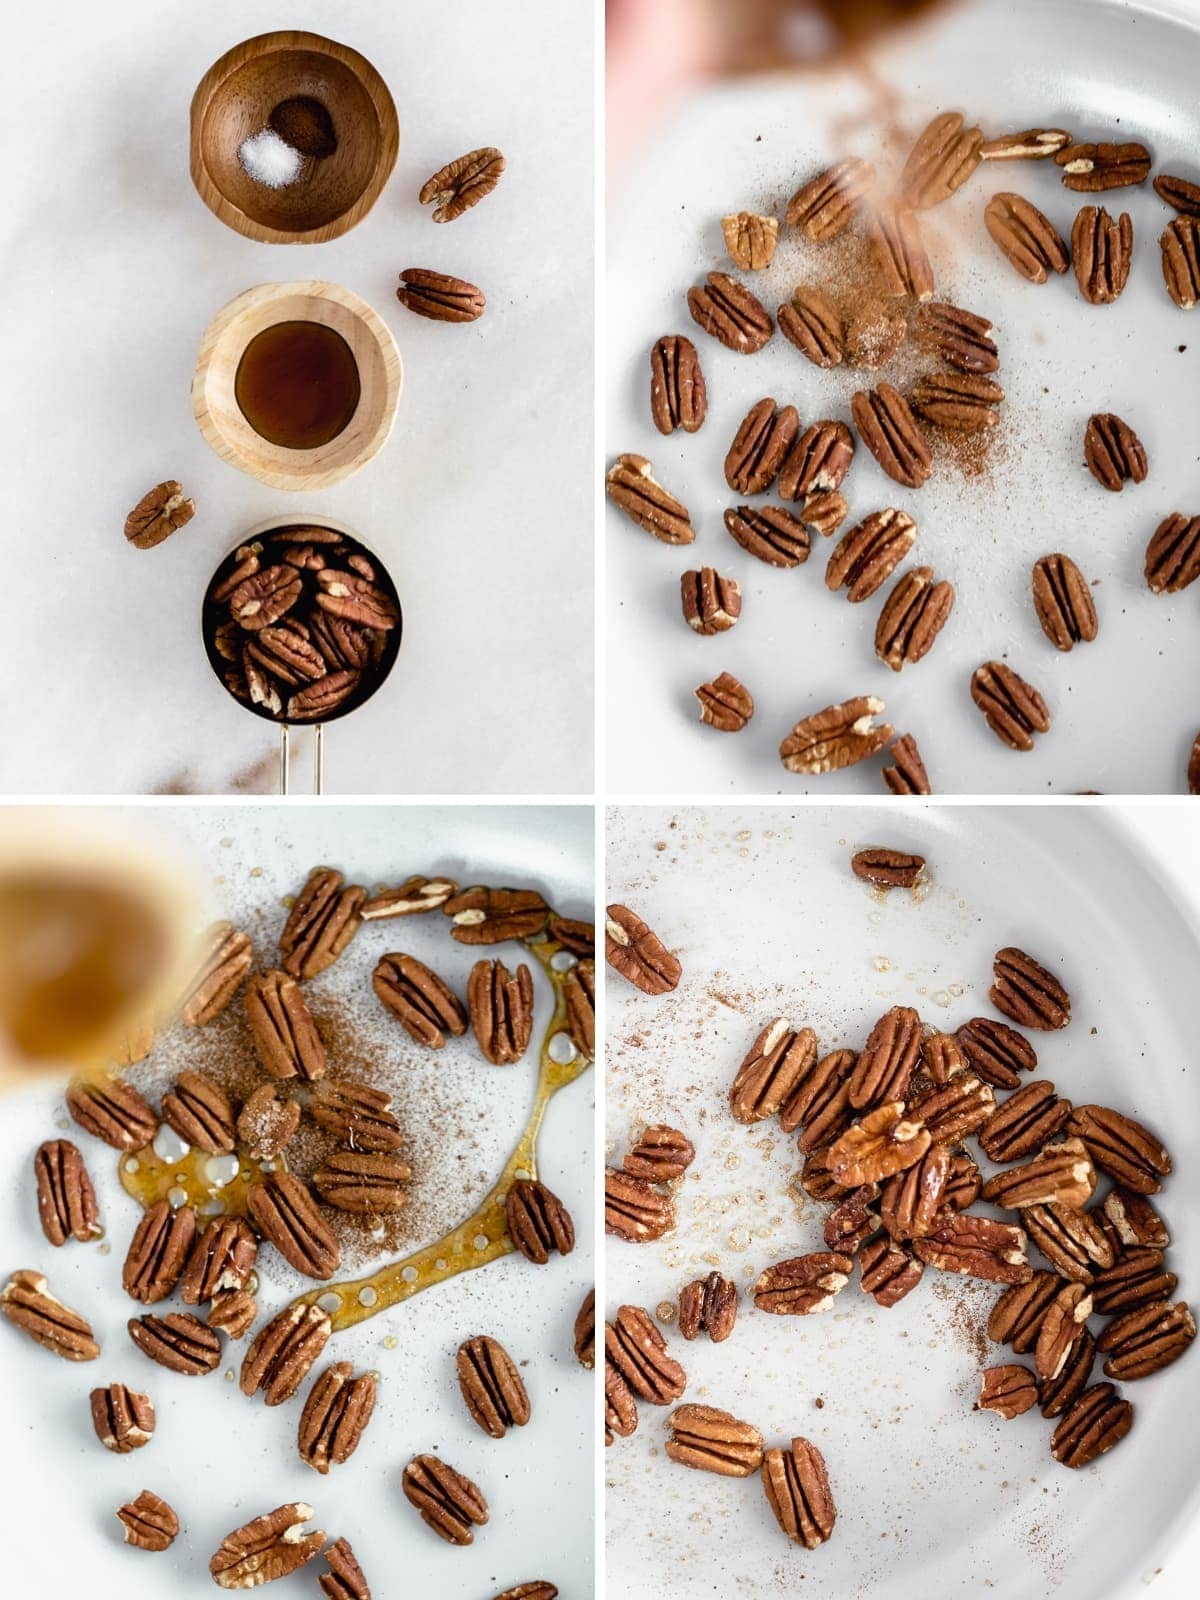 Easy 3 Ingredient Candied Pecans are sweet, crunchy, and perfect for the holidays! Add them to salads, oatmeal, or just snack on them. (gluten-free, refined sugar-free, vegan)